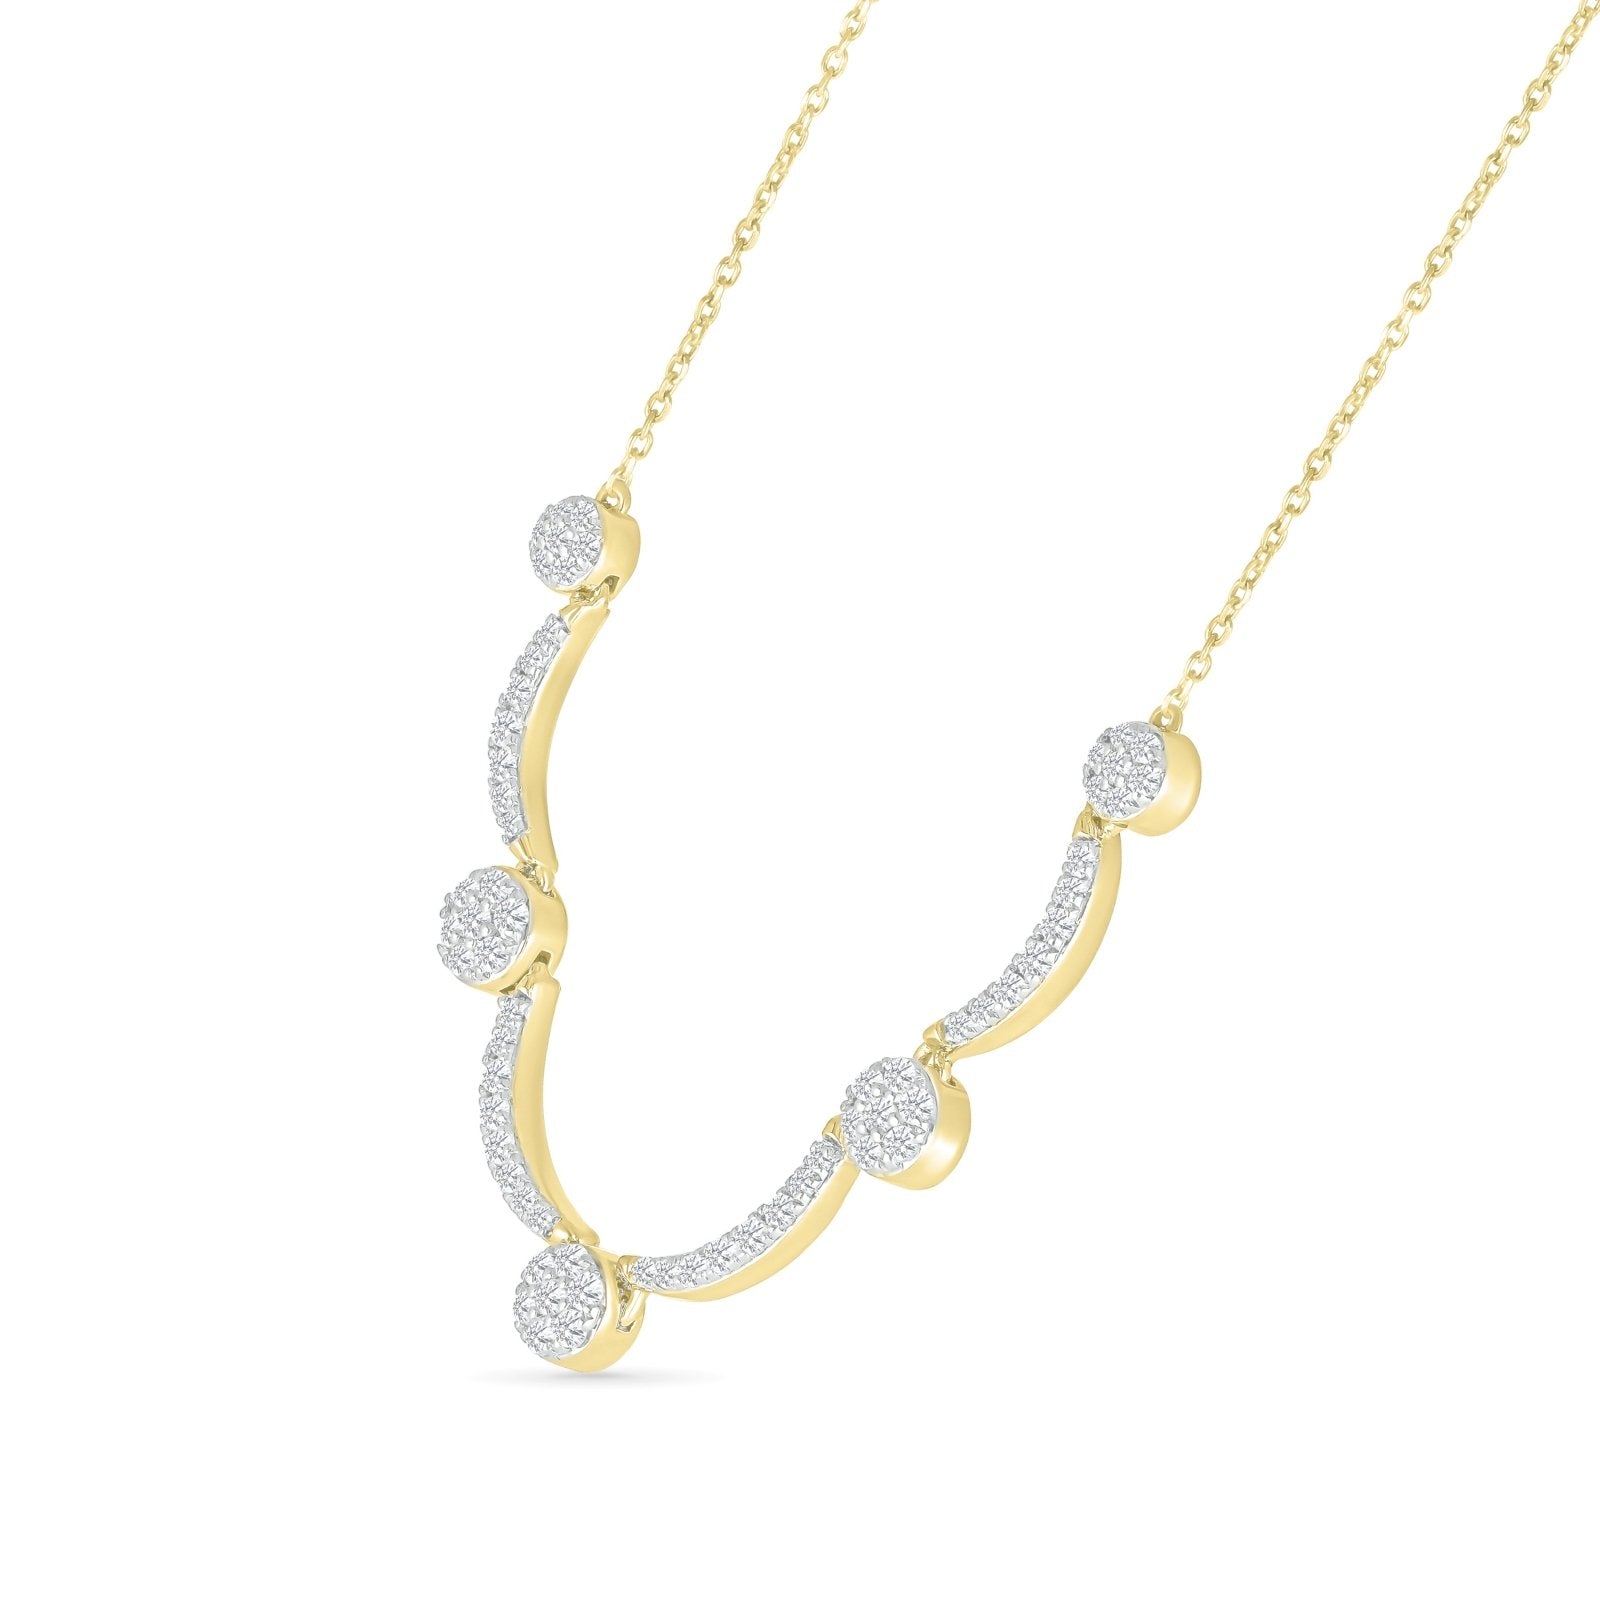 Abstract Diamond Choker Necklace Necklaces Estella Collection 32694 Diamond Made to Order Yellow Gold #tag4# #tag5# #tag6# #tag7# #tag8# #tag9# #tag10#